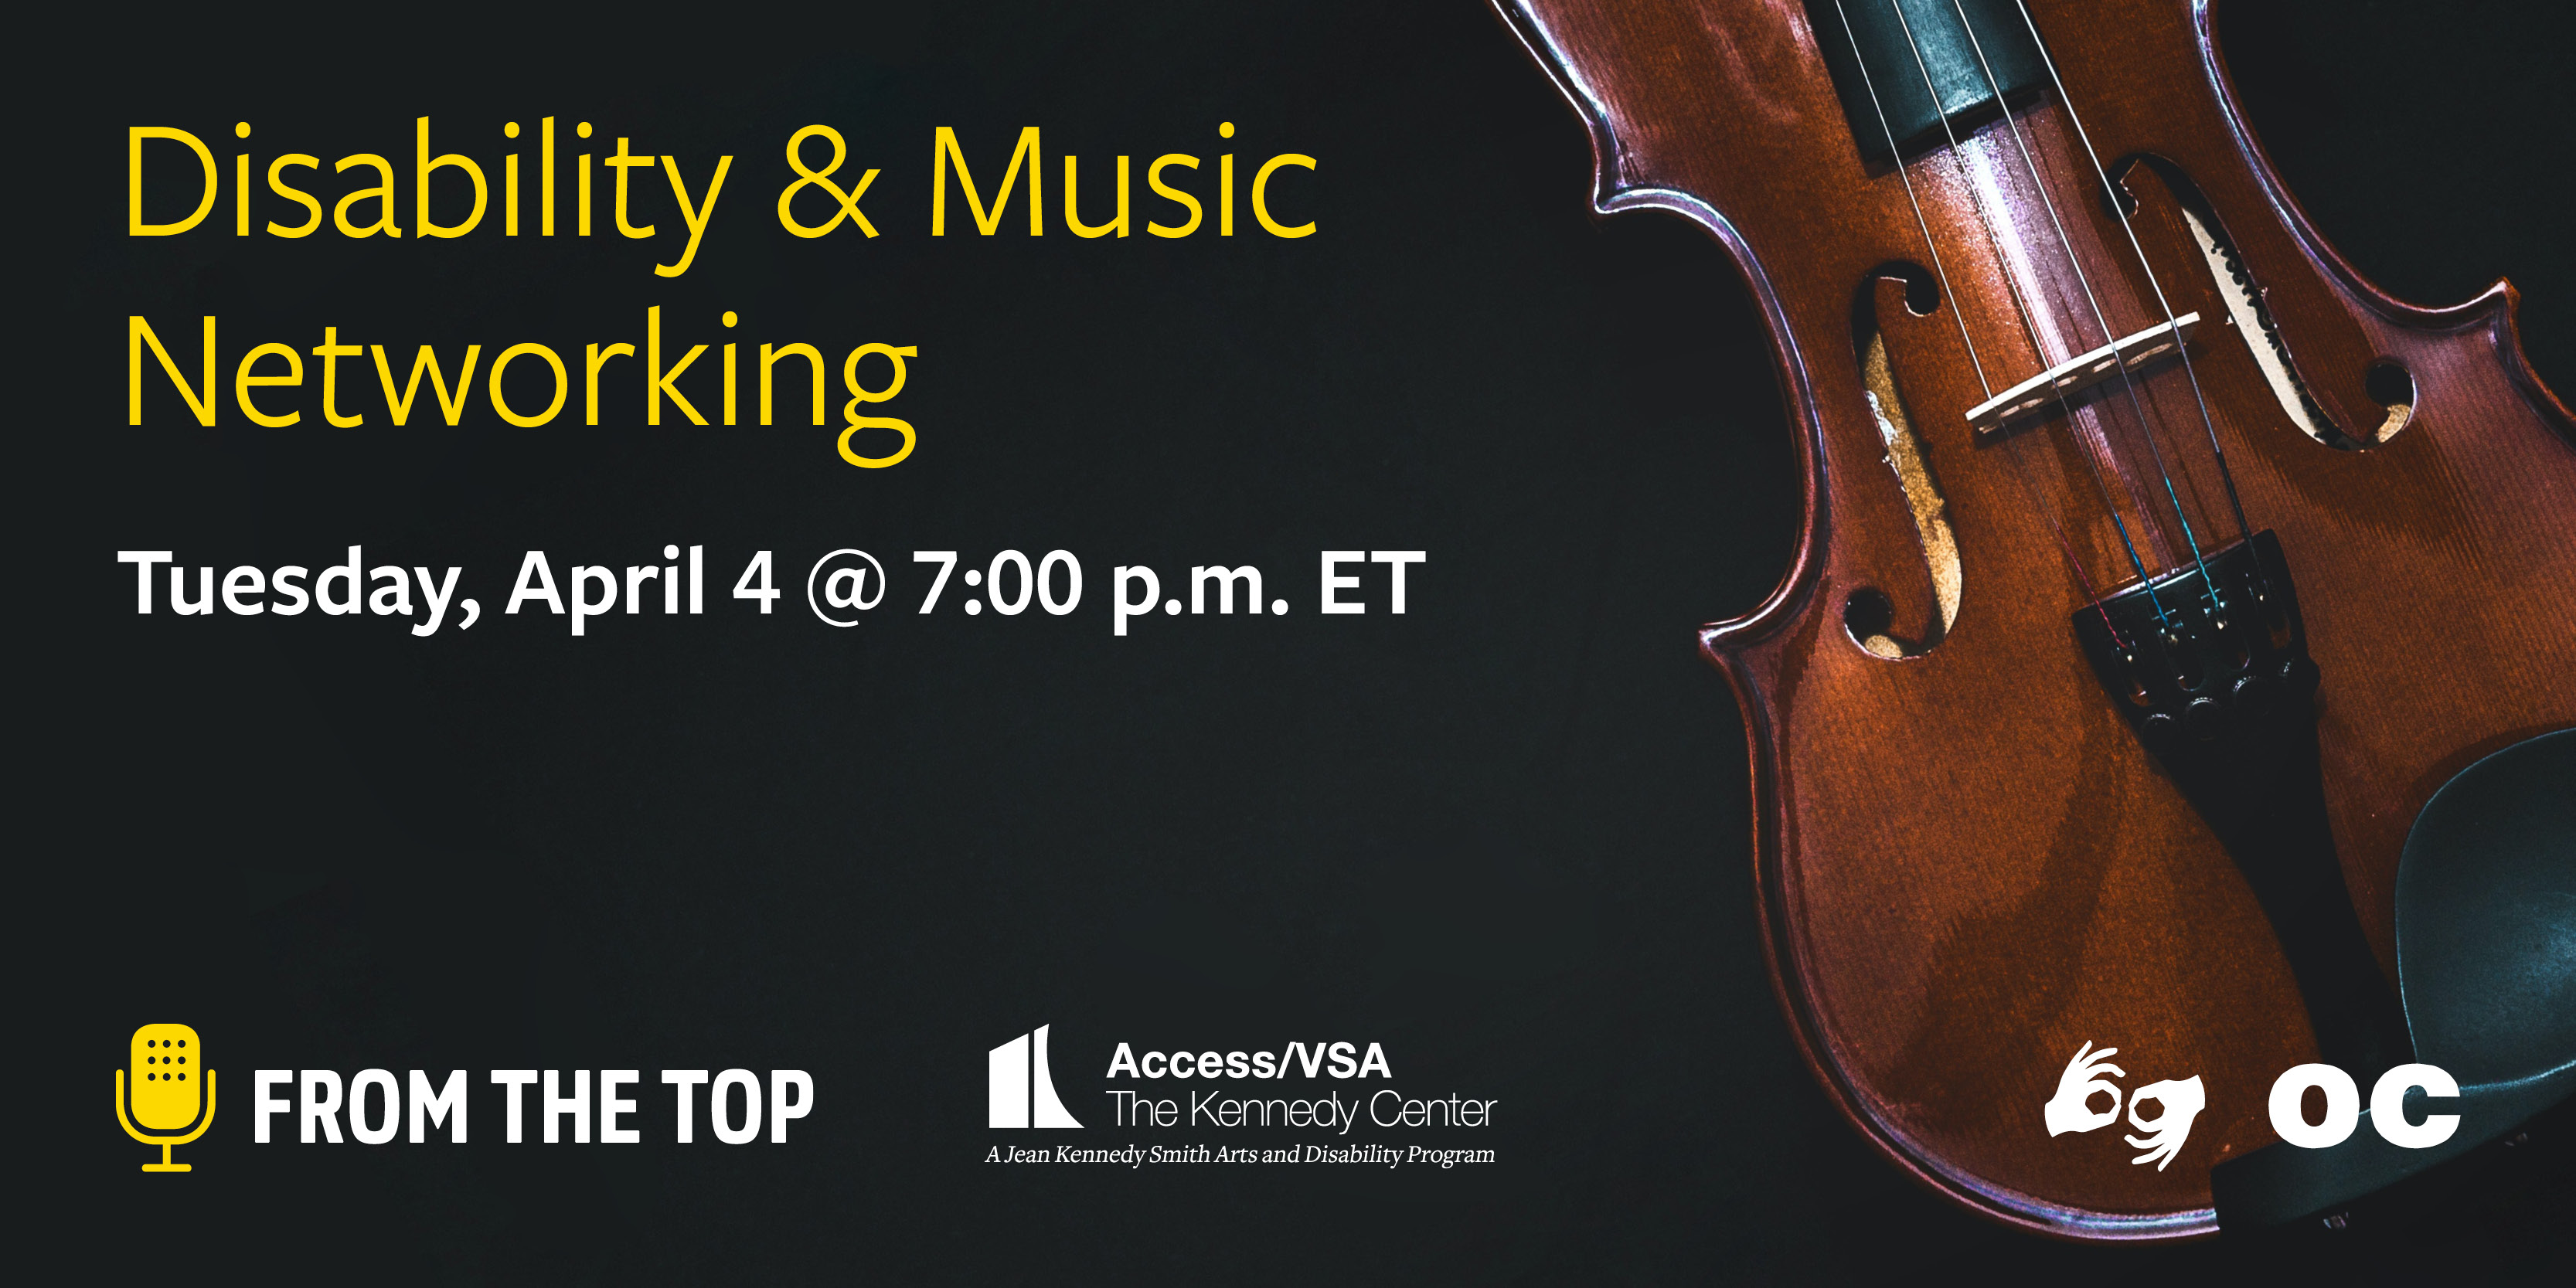 Graphic of a violin, with a black background and text "Disability & Music Networking, Tuesday, April 4 at 7pm ET." Logos of the Kennedy Center Office of Access/VSA and From the Top appear in white and yellow at the bottom.